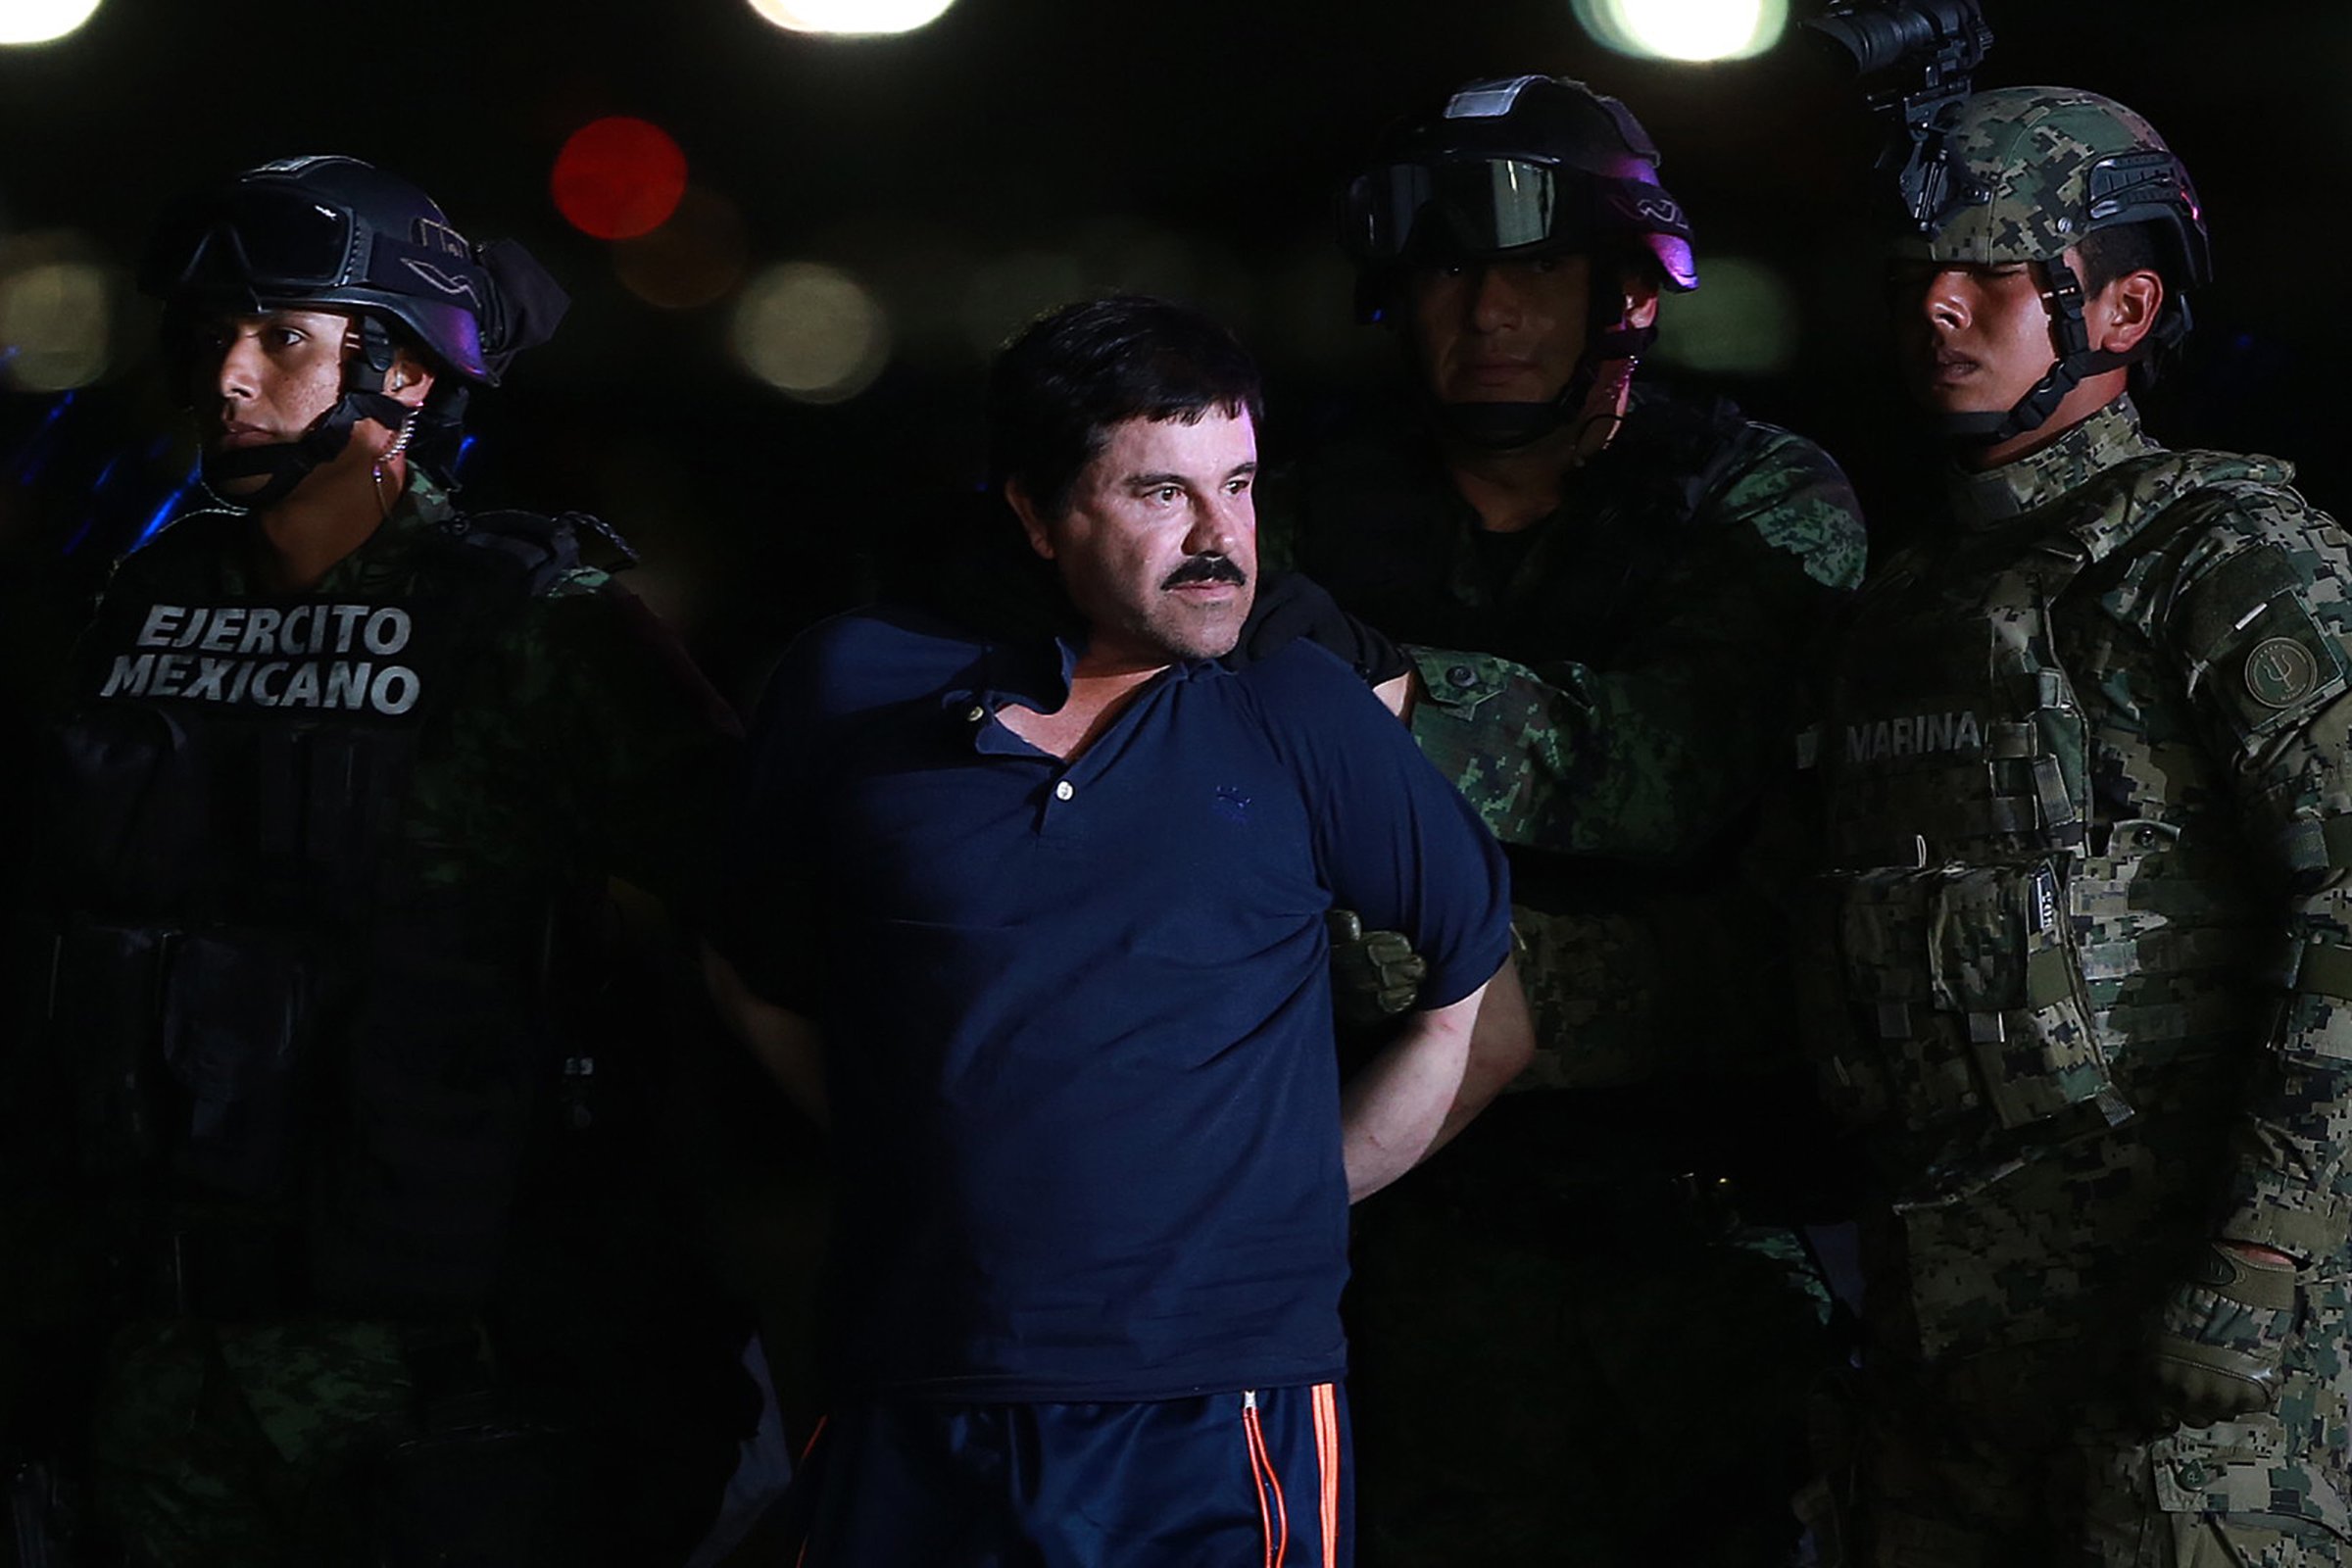 Joaquin Guzman, the world's most wanted-drug trafficker, center, is escorted by Mexican security forces at a Navy hangar in Mexico City, Mexico, on Jan. 8, 2016.